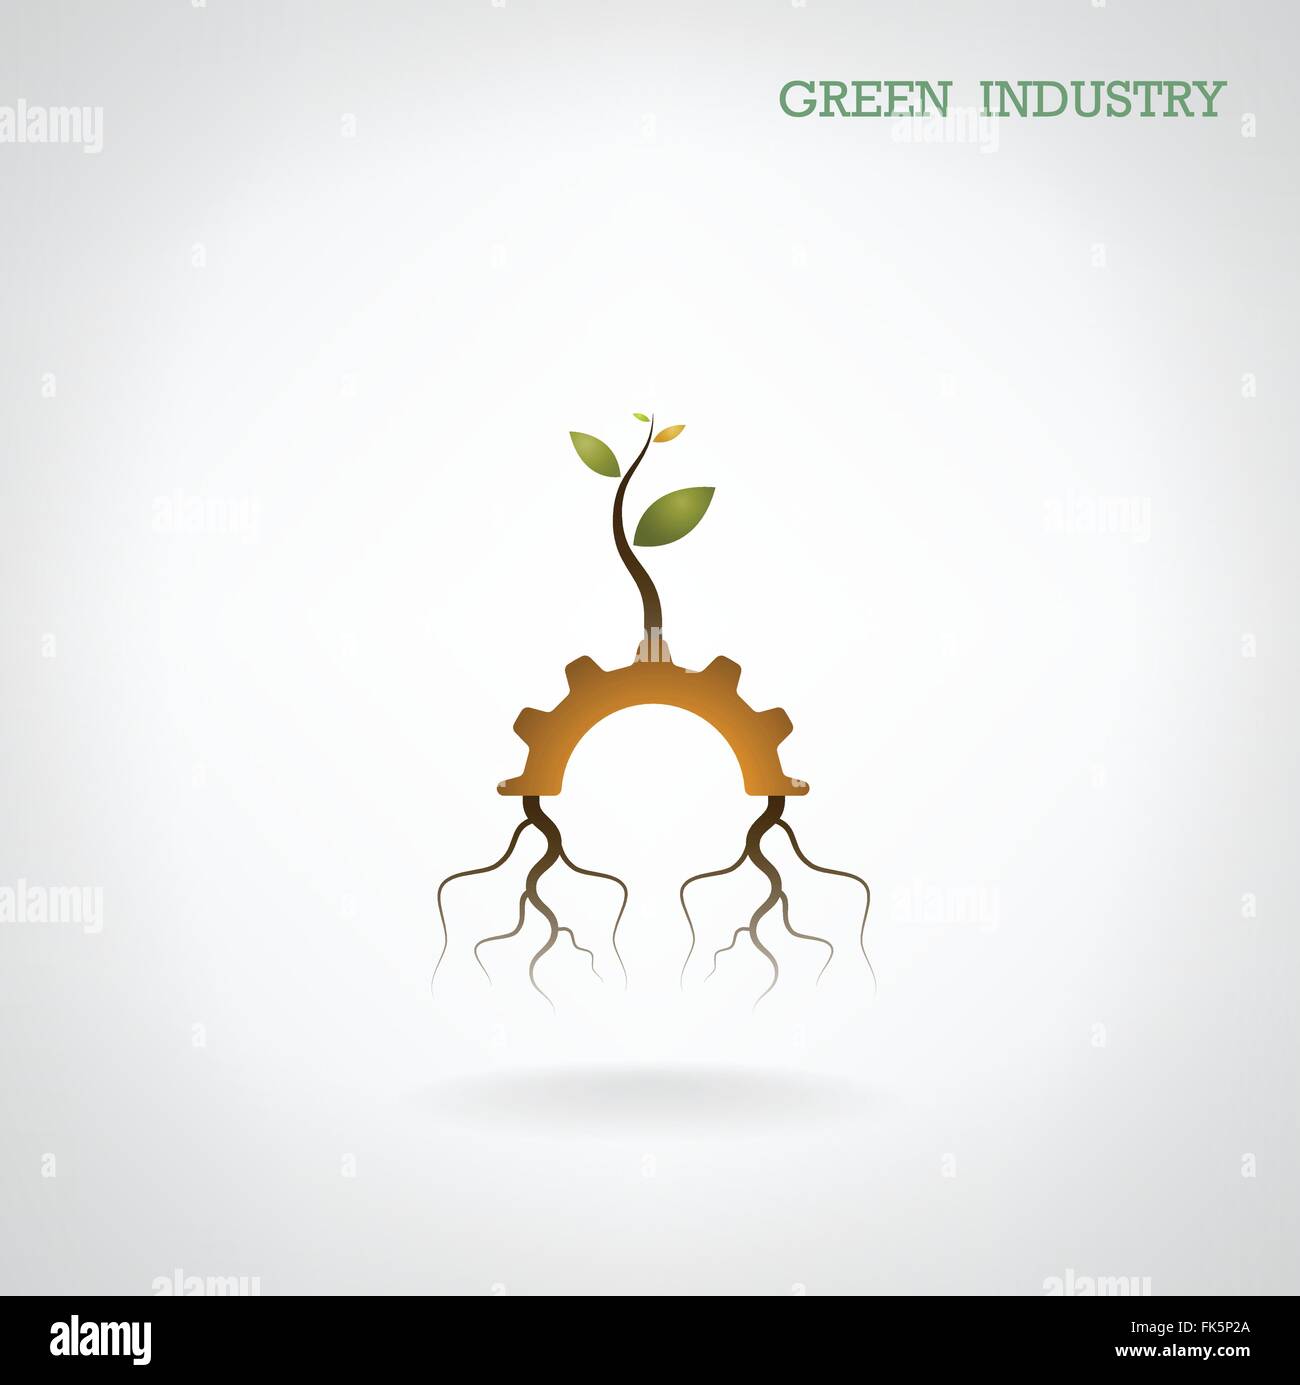 Green industry concept. Small plant and gear symbol, business and green idea, education concept. Vector illustration. Stock Vector